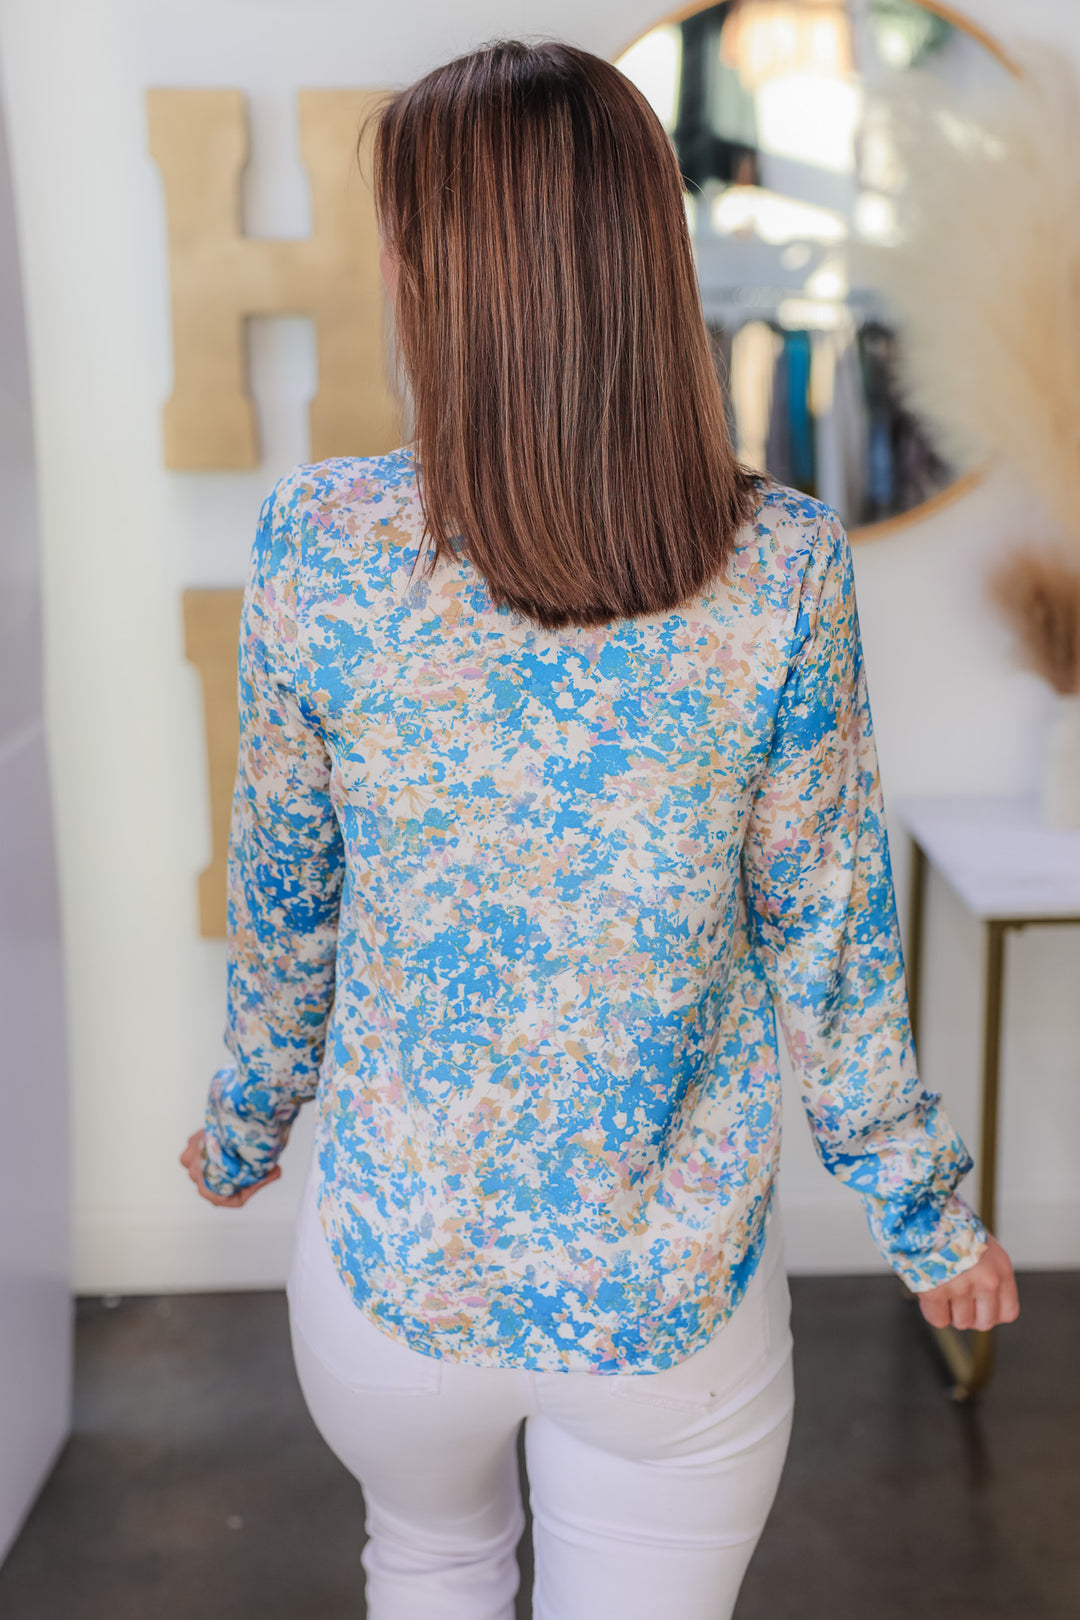 A brunette woman standing in a shop wearing a satin tie front blouse with white jeans. The colors in the top are blue, pink, white, yellow and cream. She is rear facing.